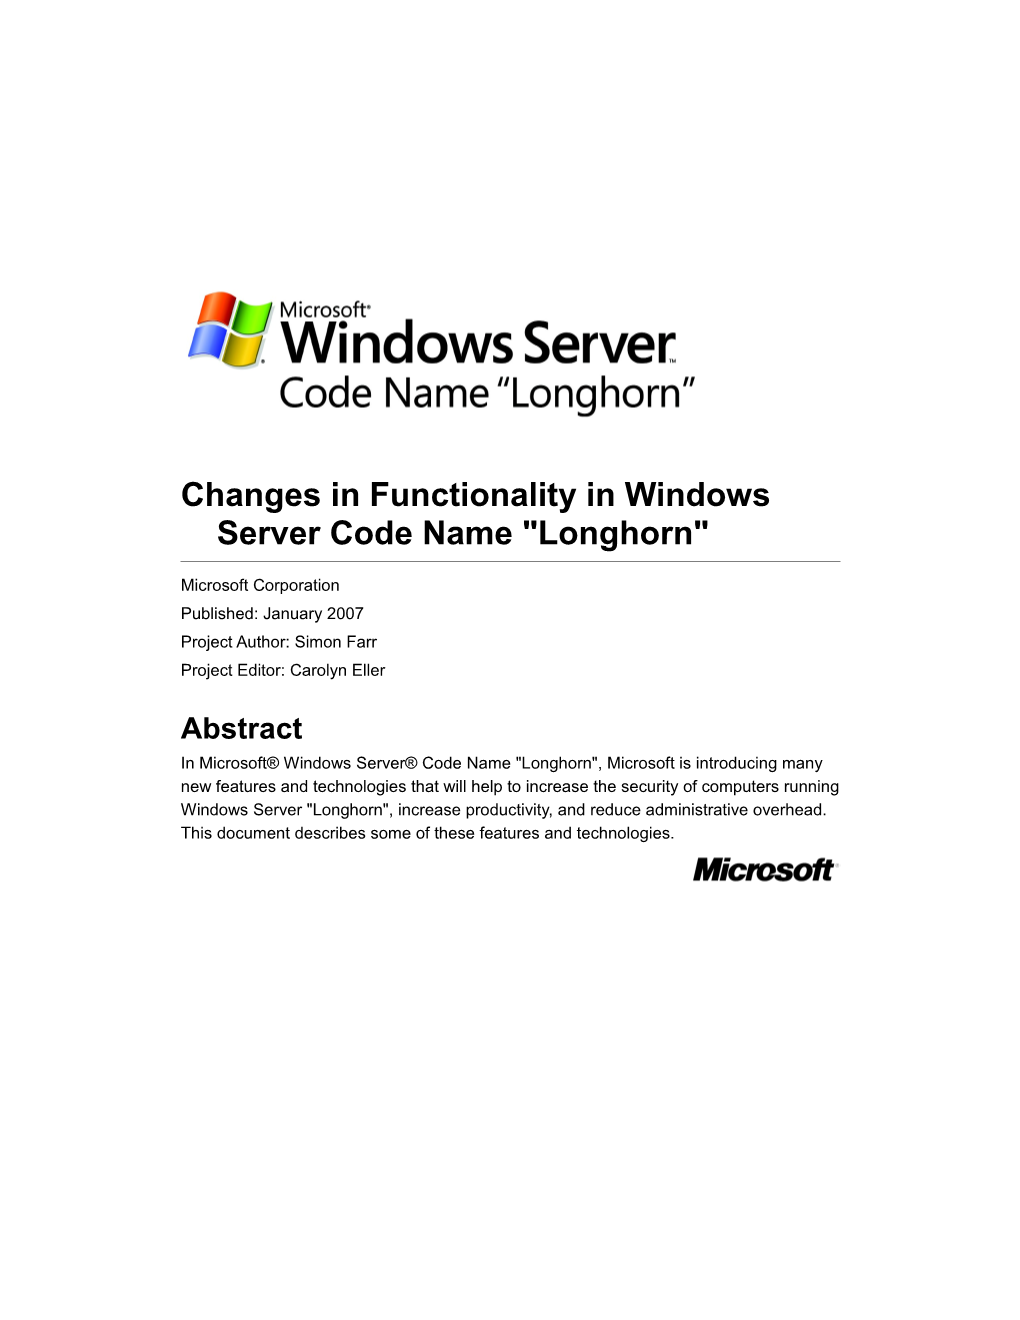 Changes in Functionality in Windows Server Longhorn